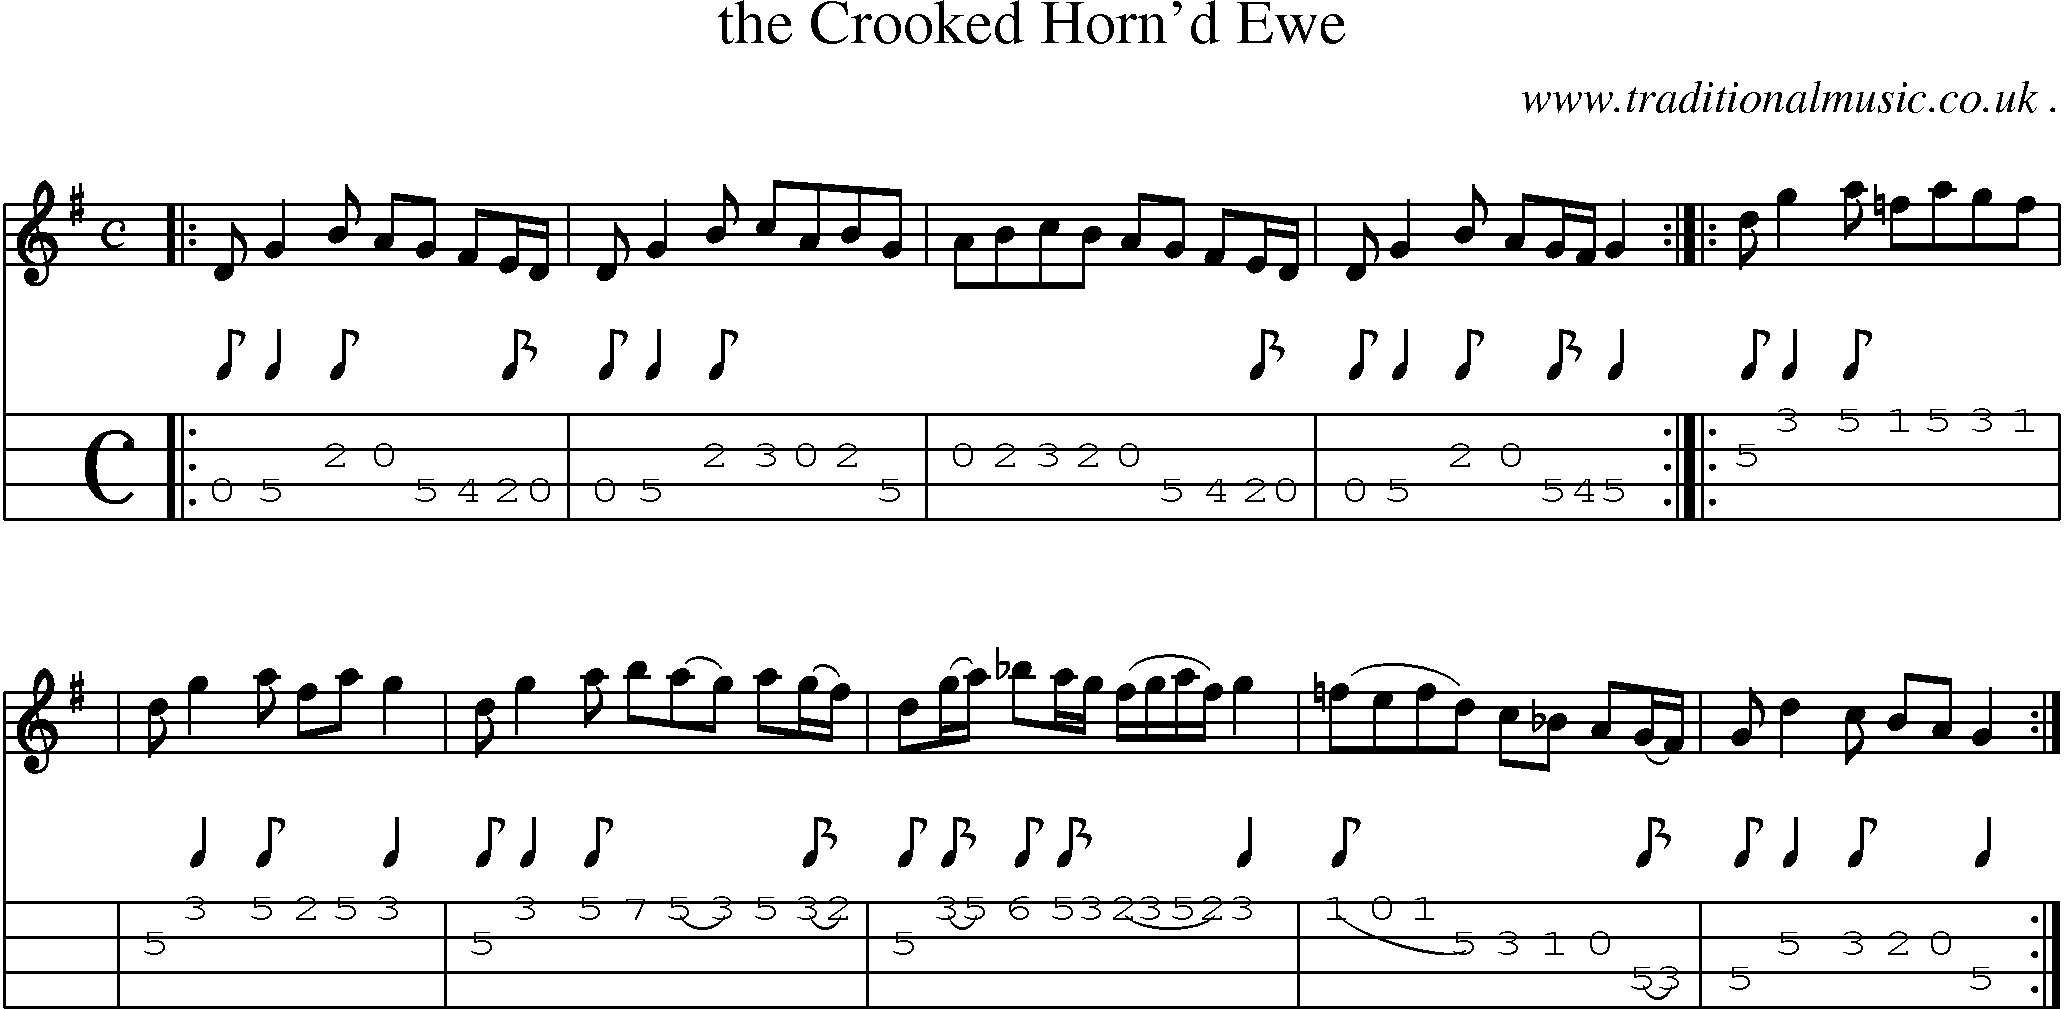 Sheet-music  score, Chords and Mandolin Tabs for The Crooked Hornd Ewe